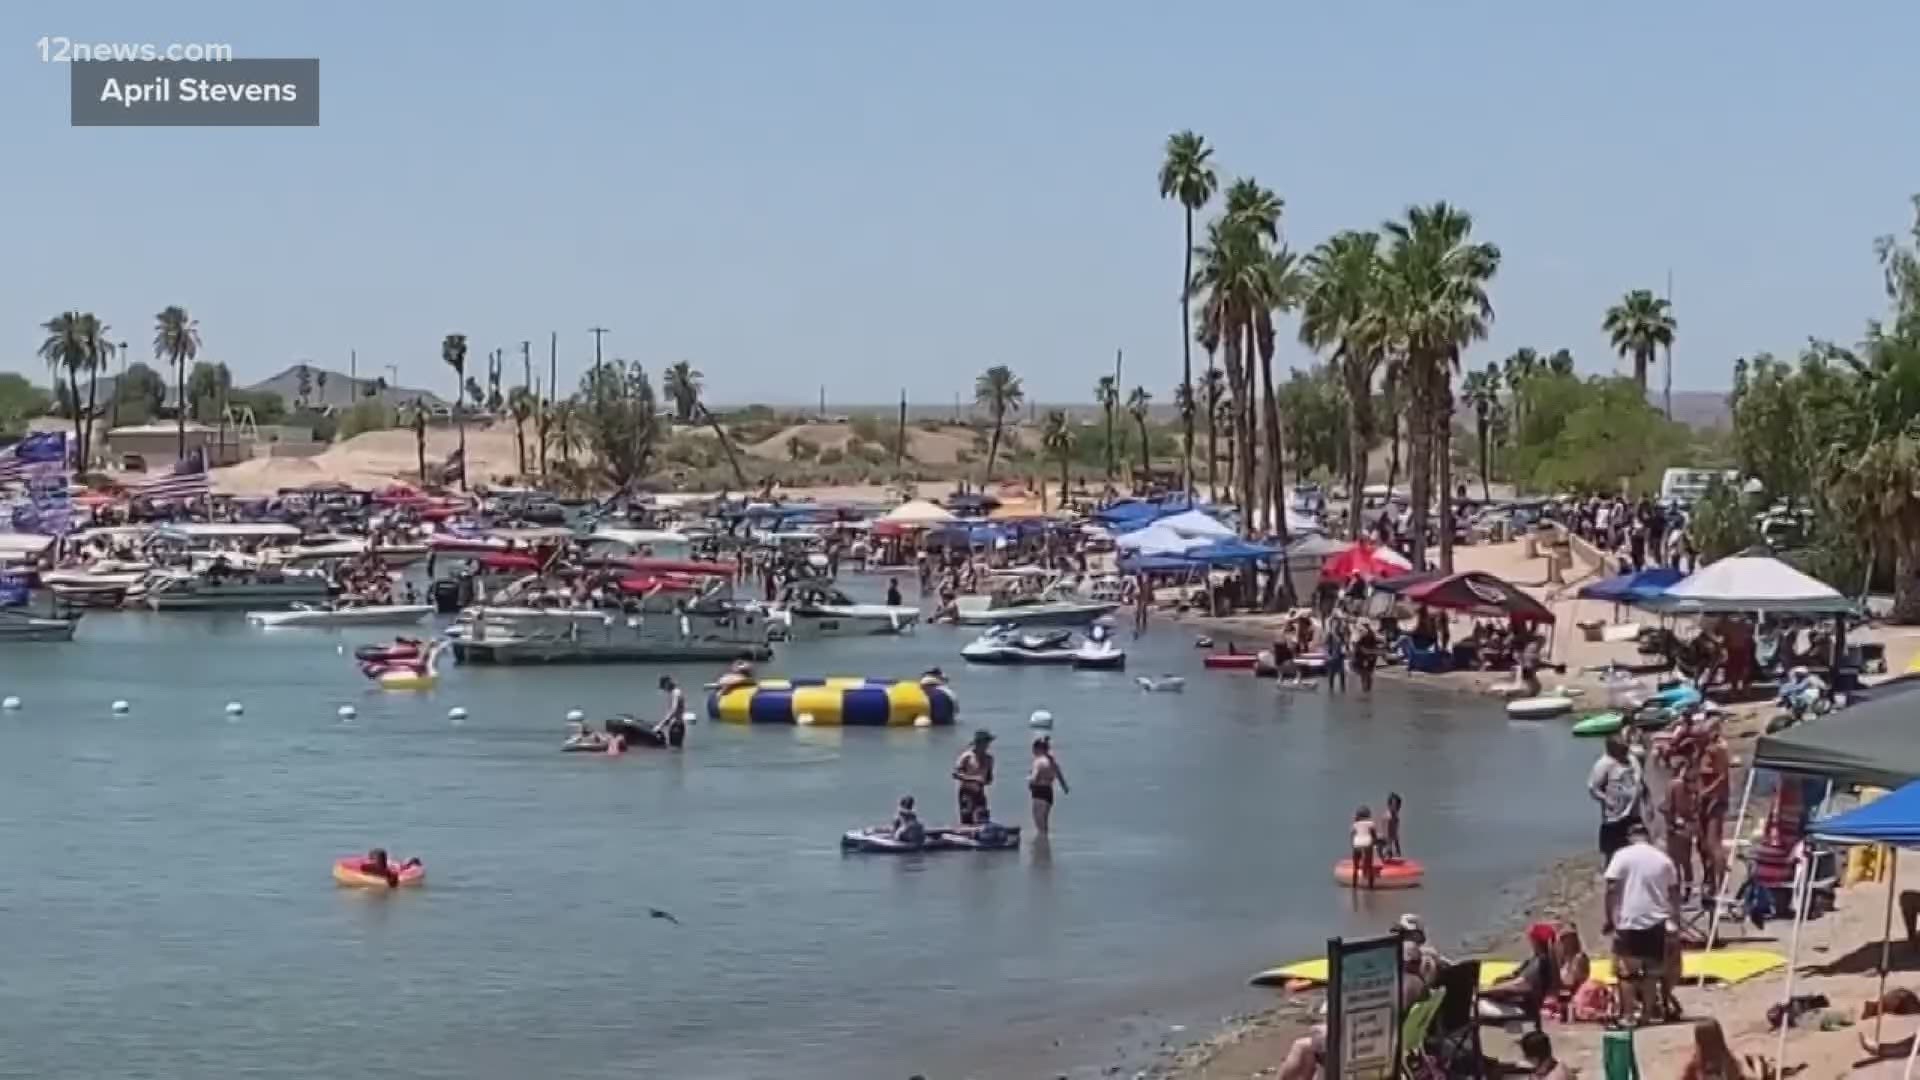 One tourism leader in Lake Havasu said this was one of the busiest Memorial Day weekends he's seen.